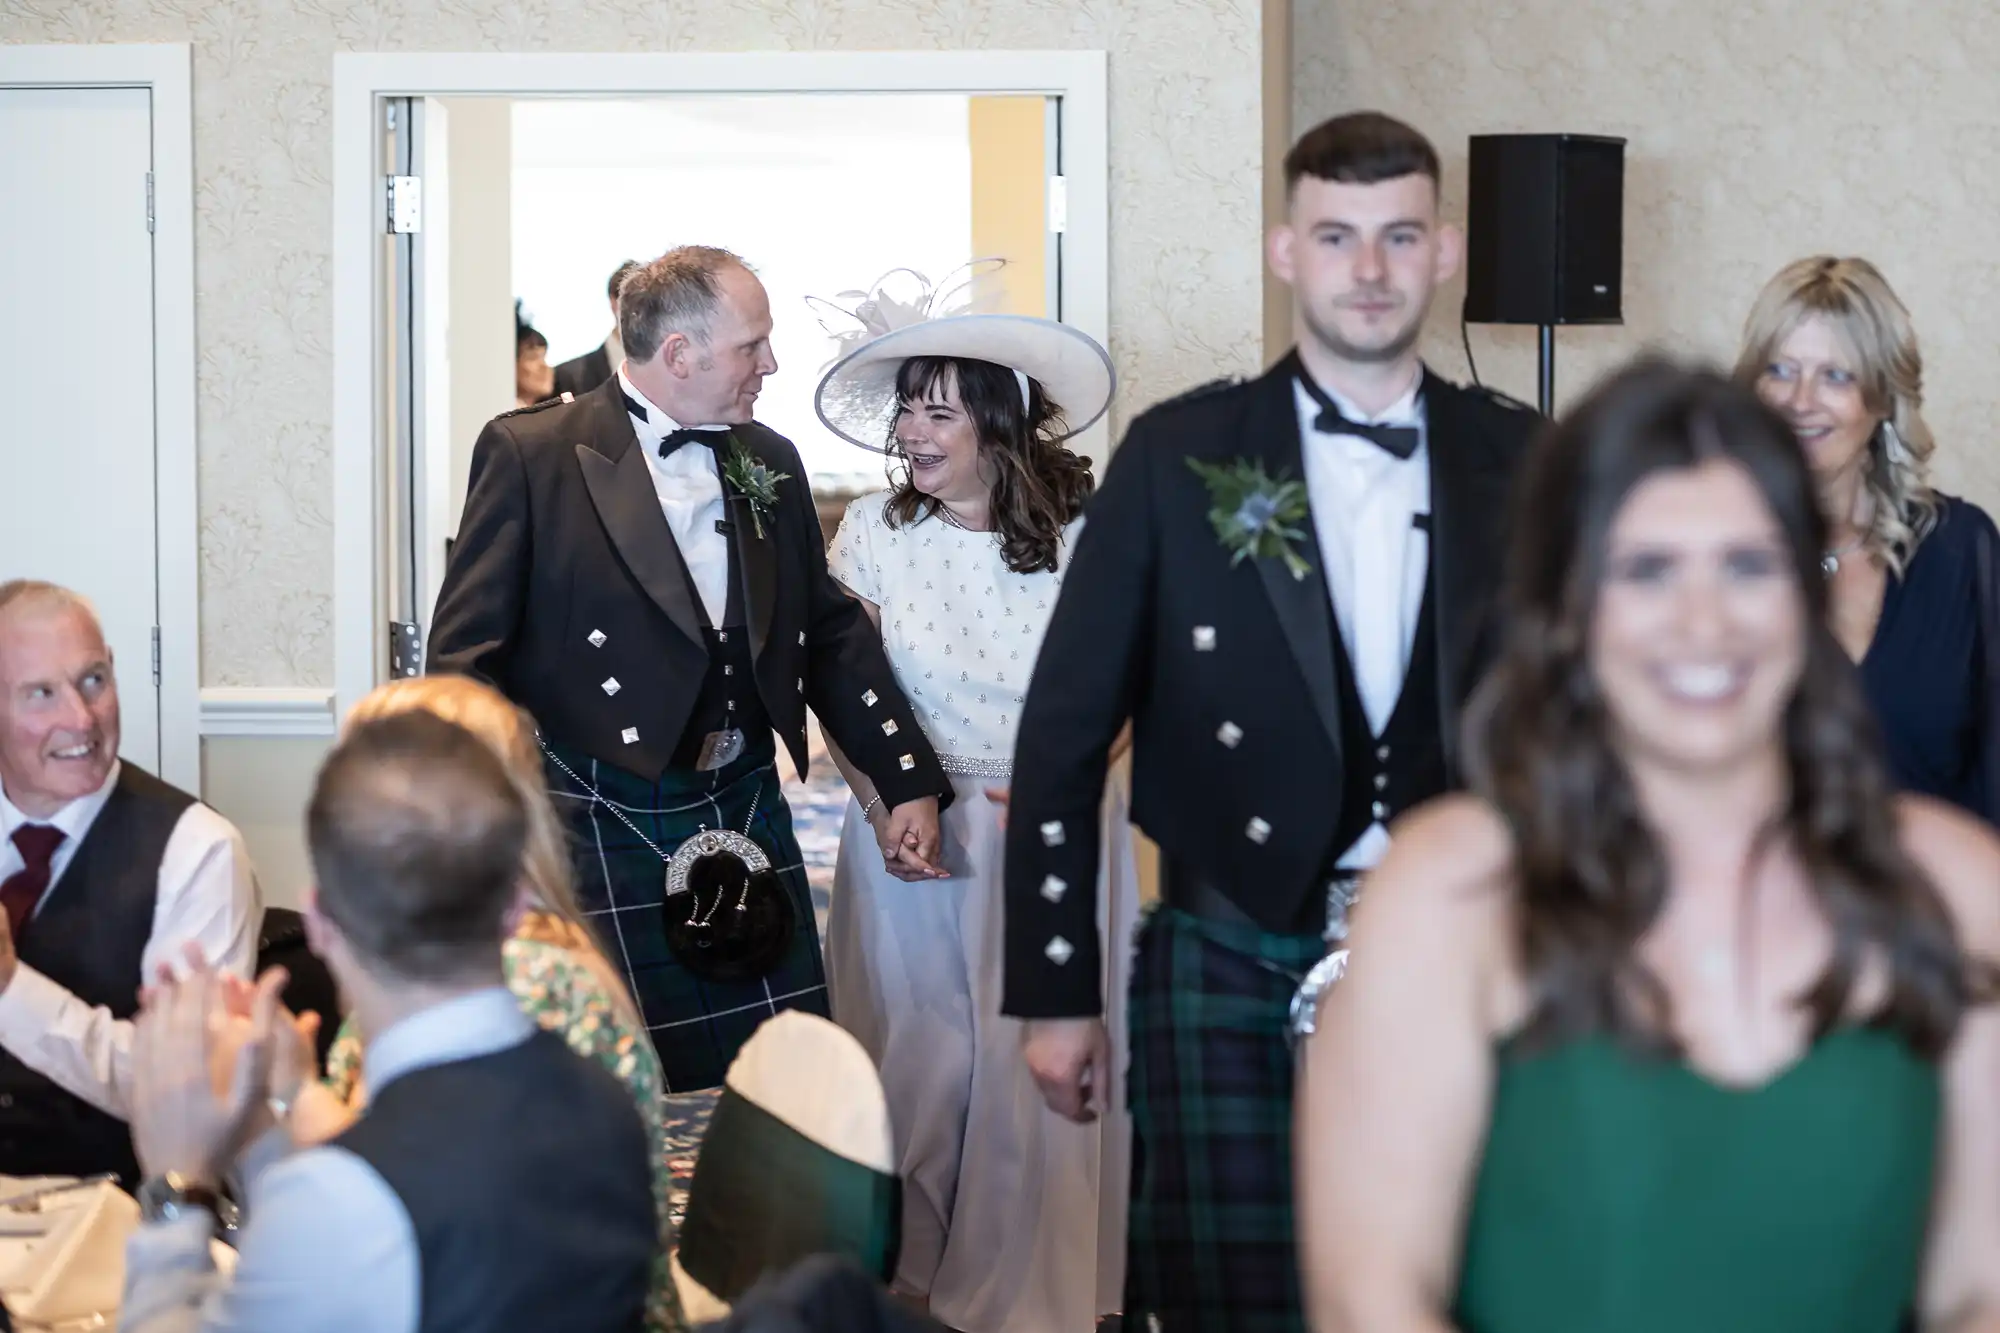 A couple in wedding attire, the man in a kilt, enters a reception room greeted by applauding guests, with other sharply dressed attendees in the foreground.